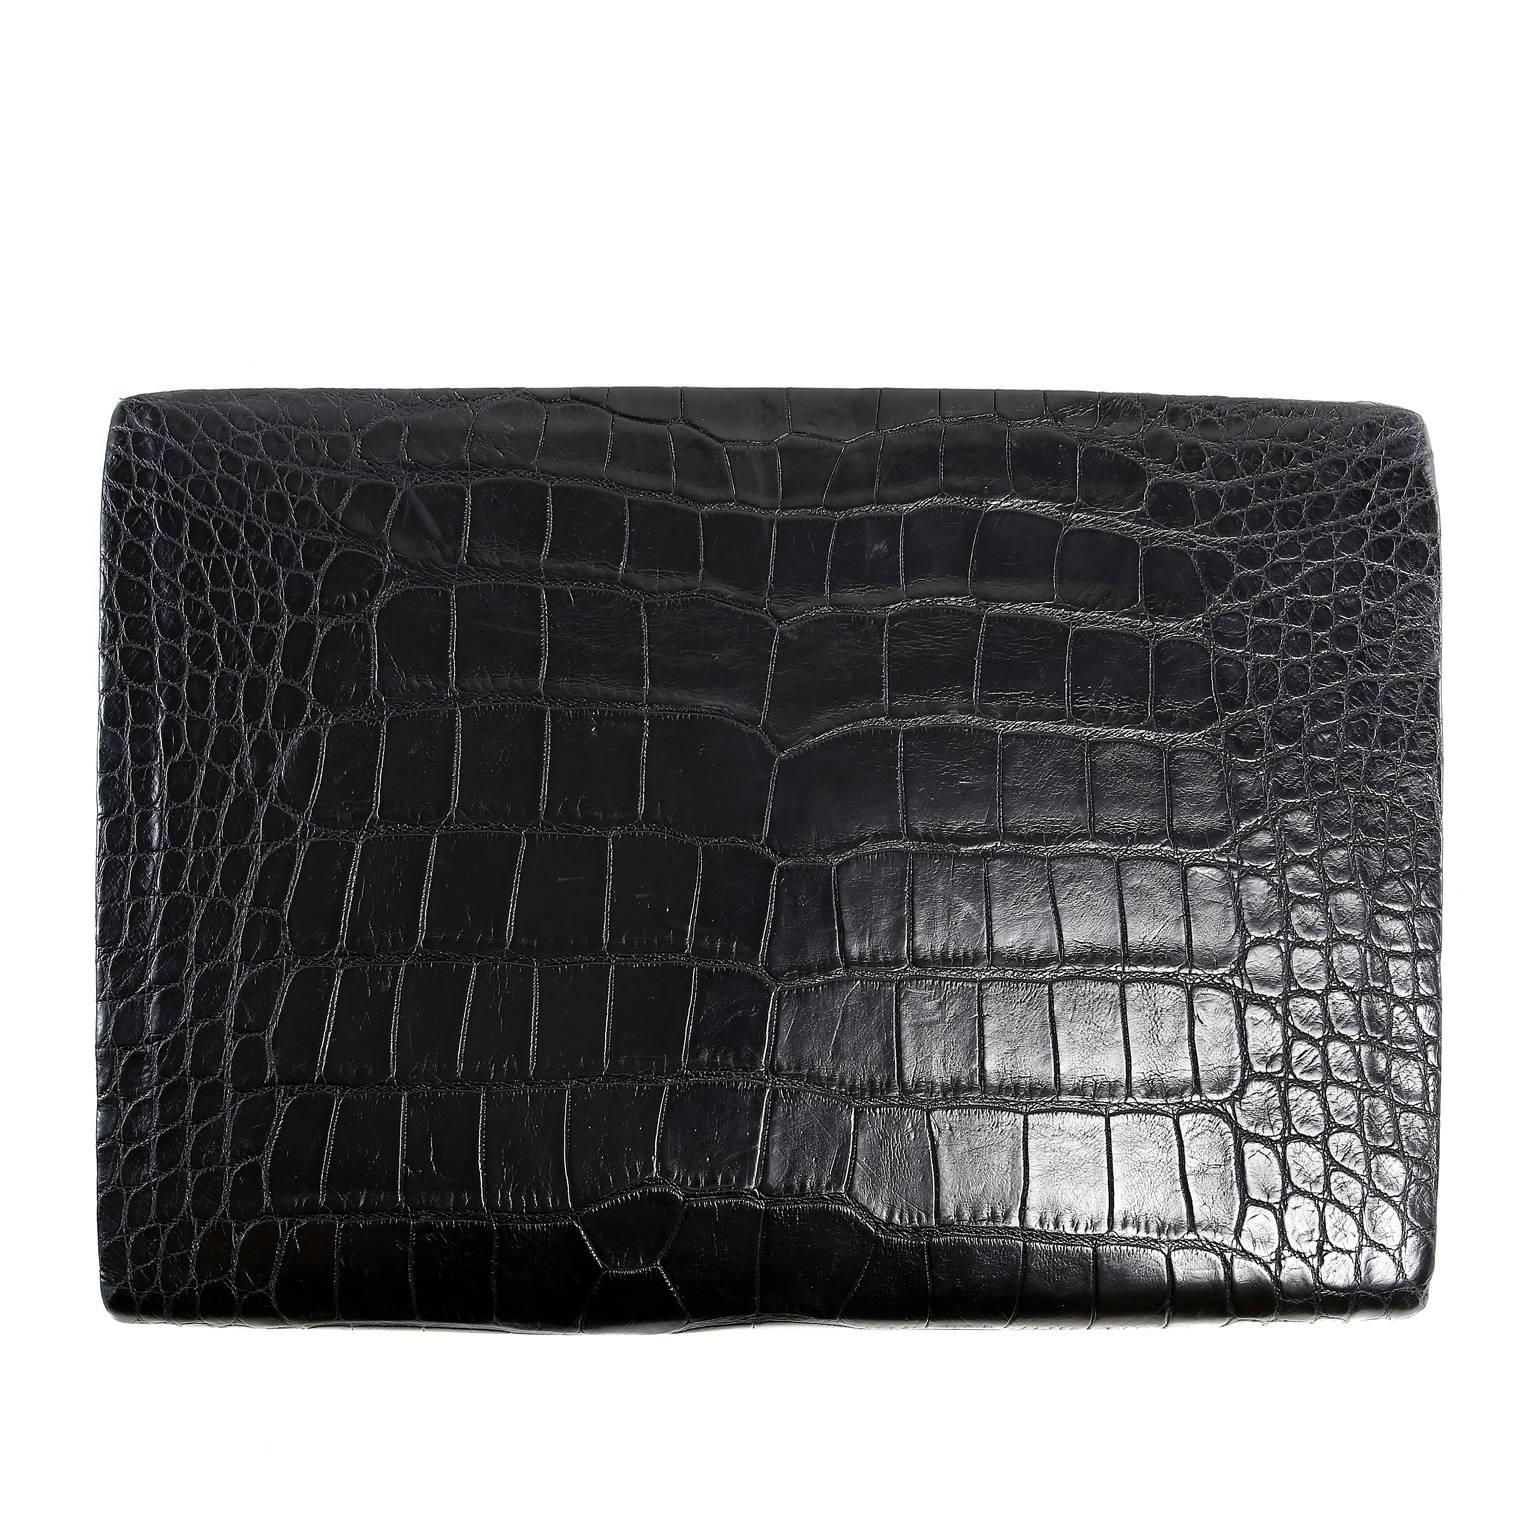 Black Paige Gamble Clack Alligator with Agate Clutch For Sale